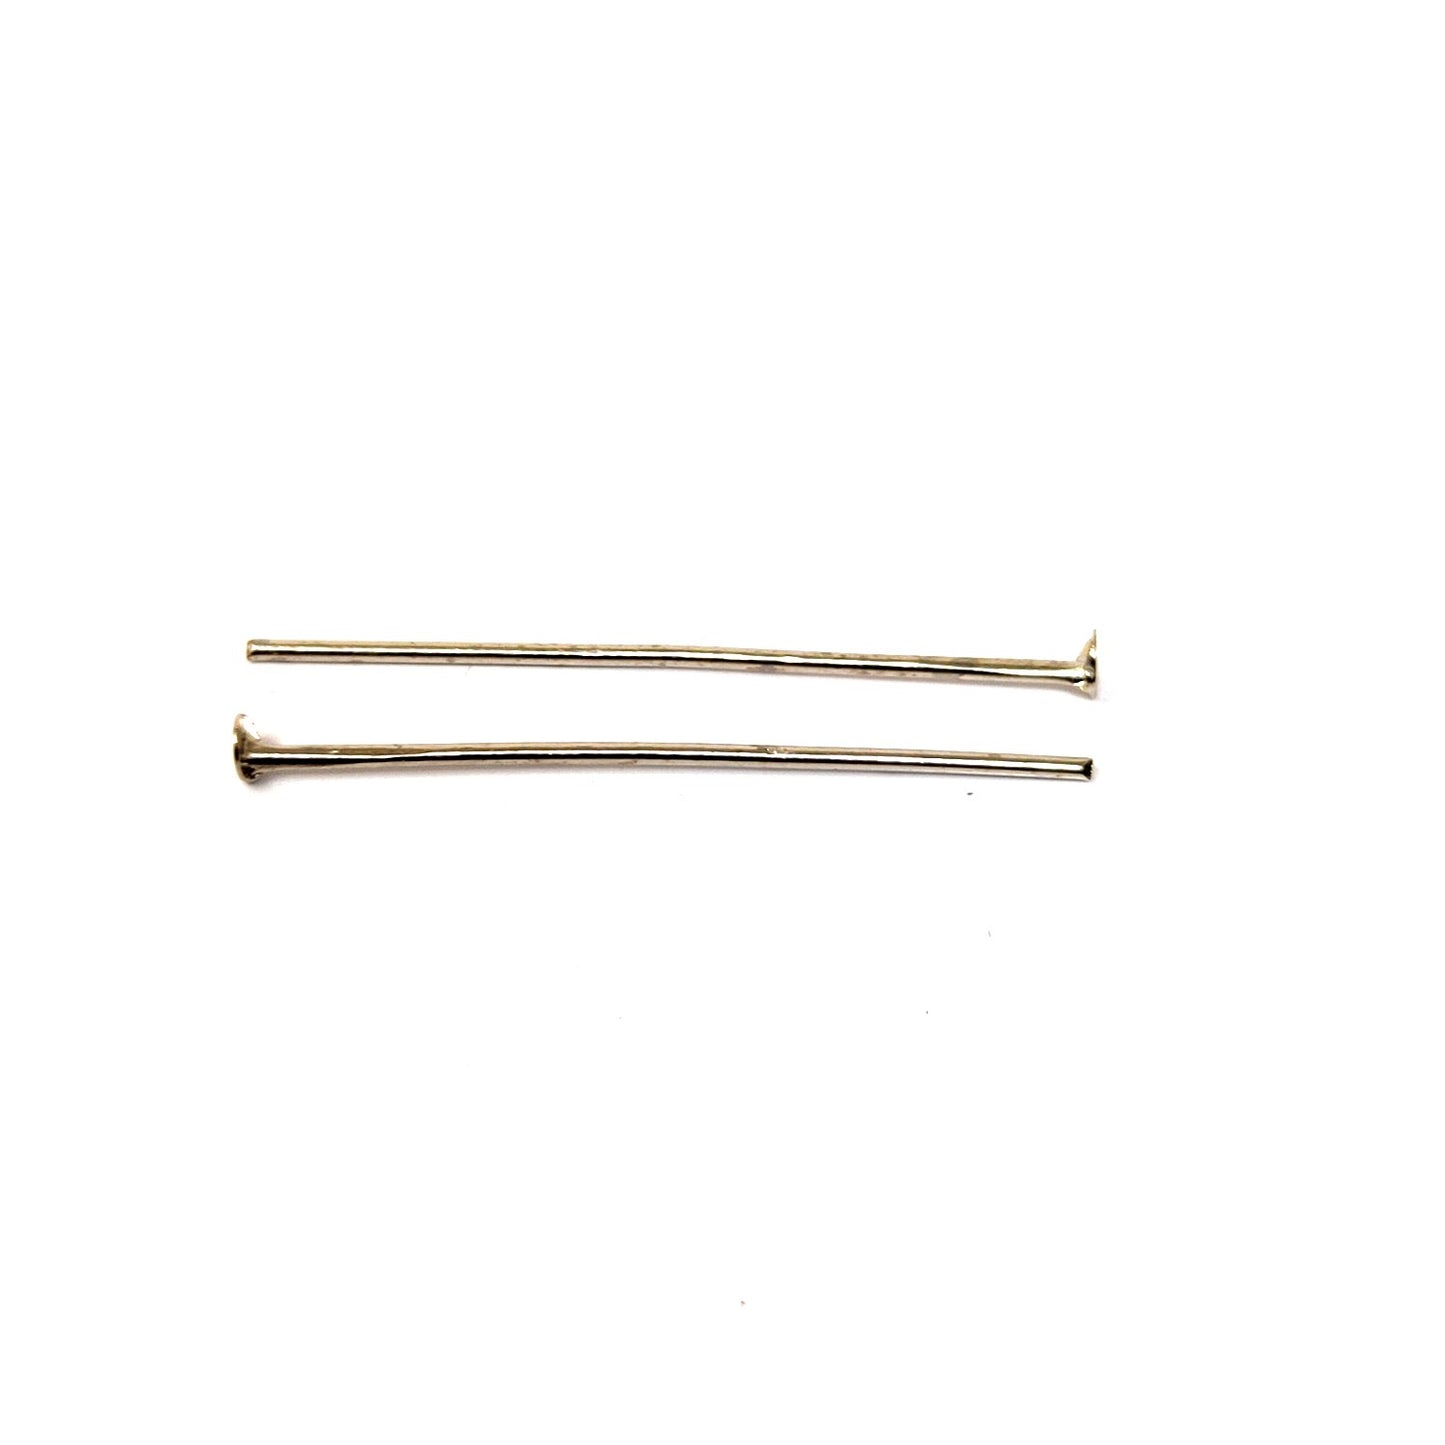 3 cm  Antique Silver Head Pins for Making Earrings and Jewellery (25 Pcs) - 96-27